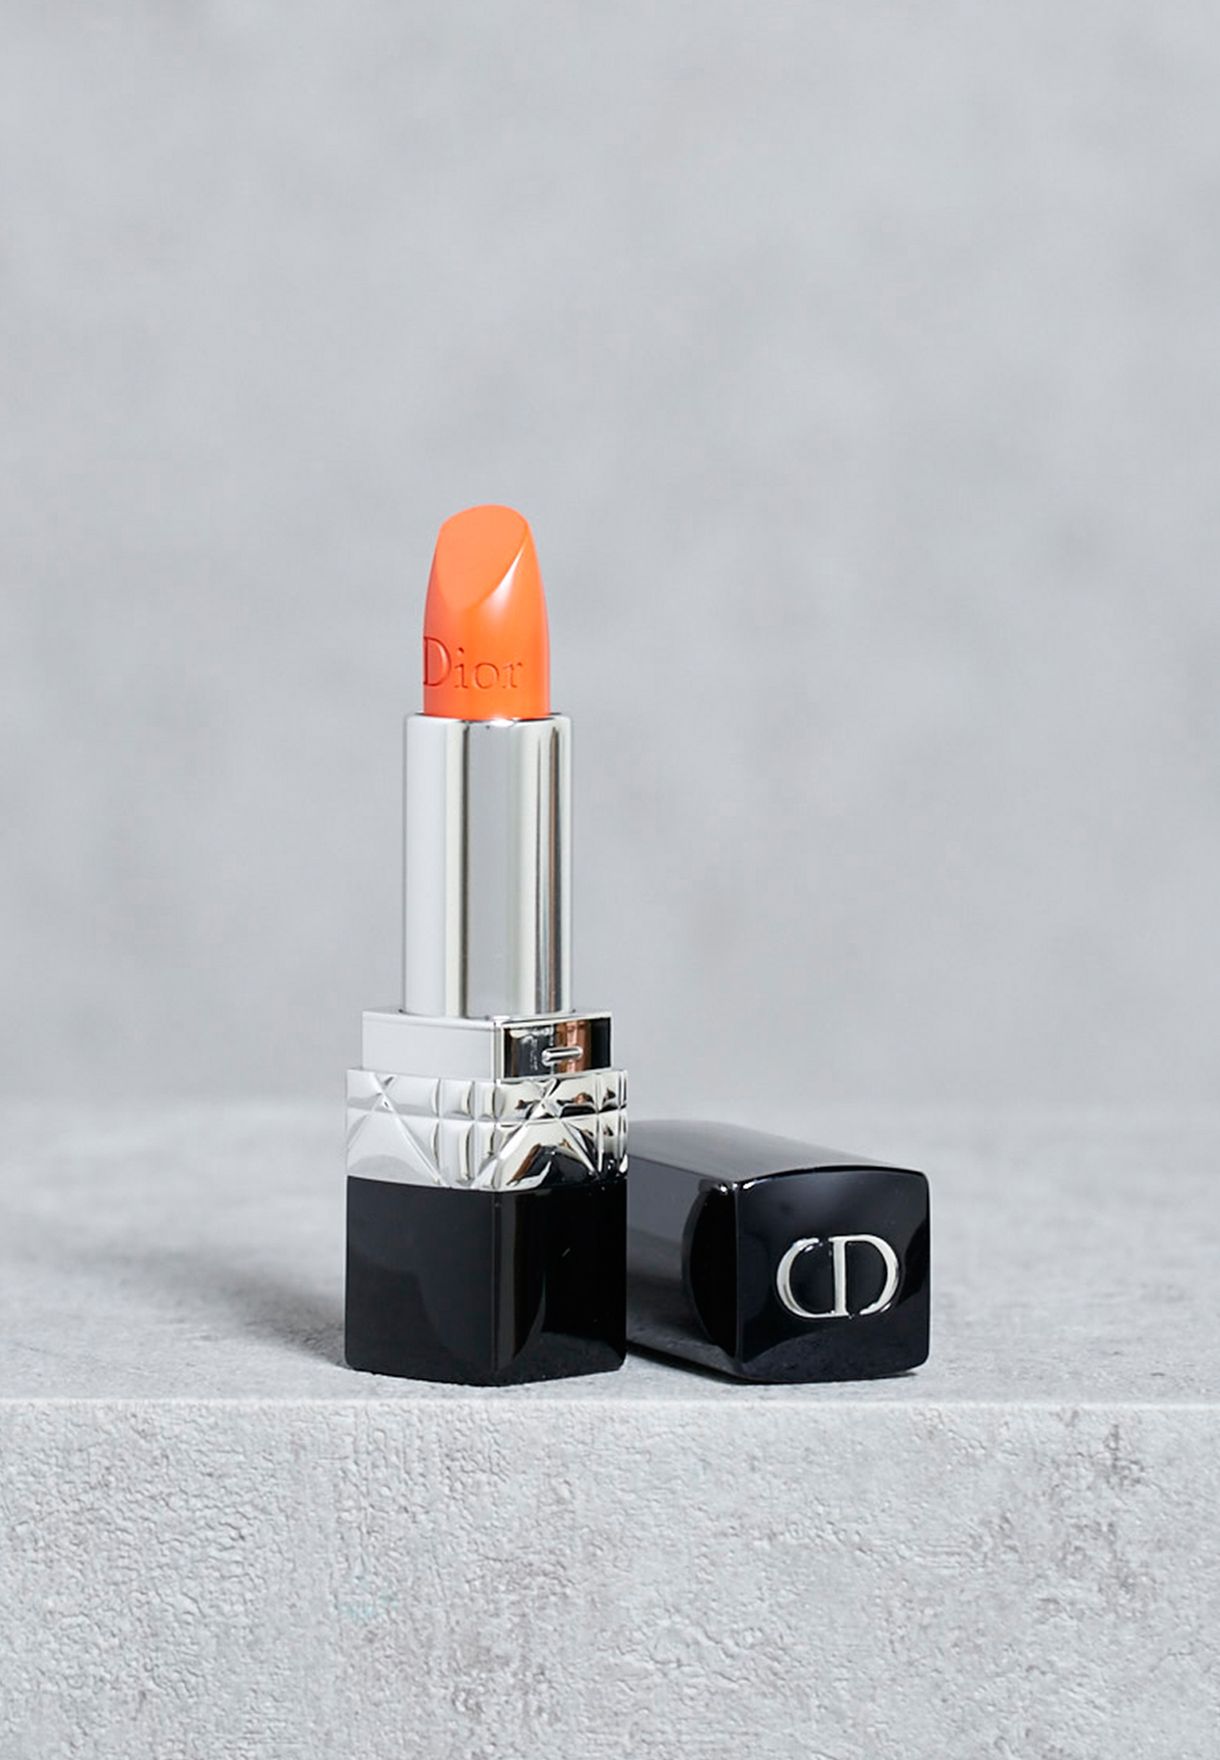 rouge dior 643